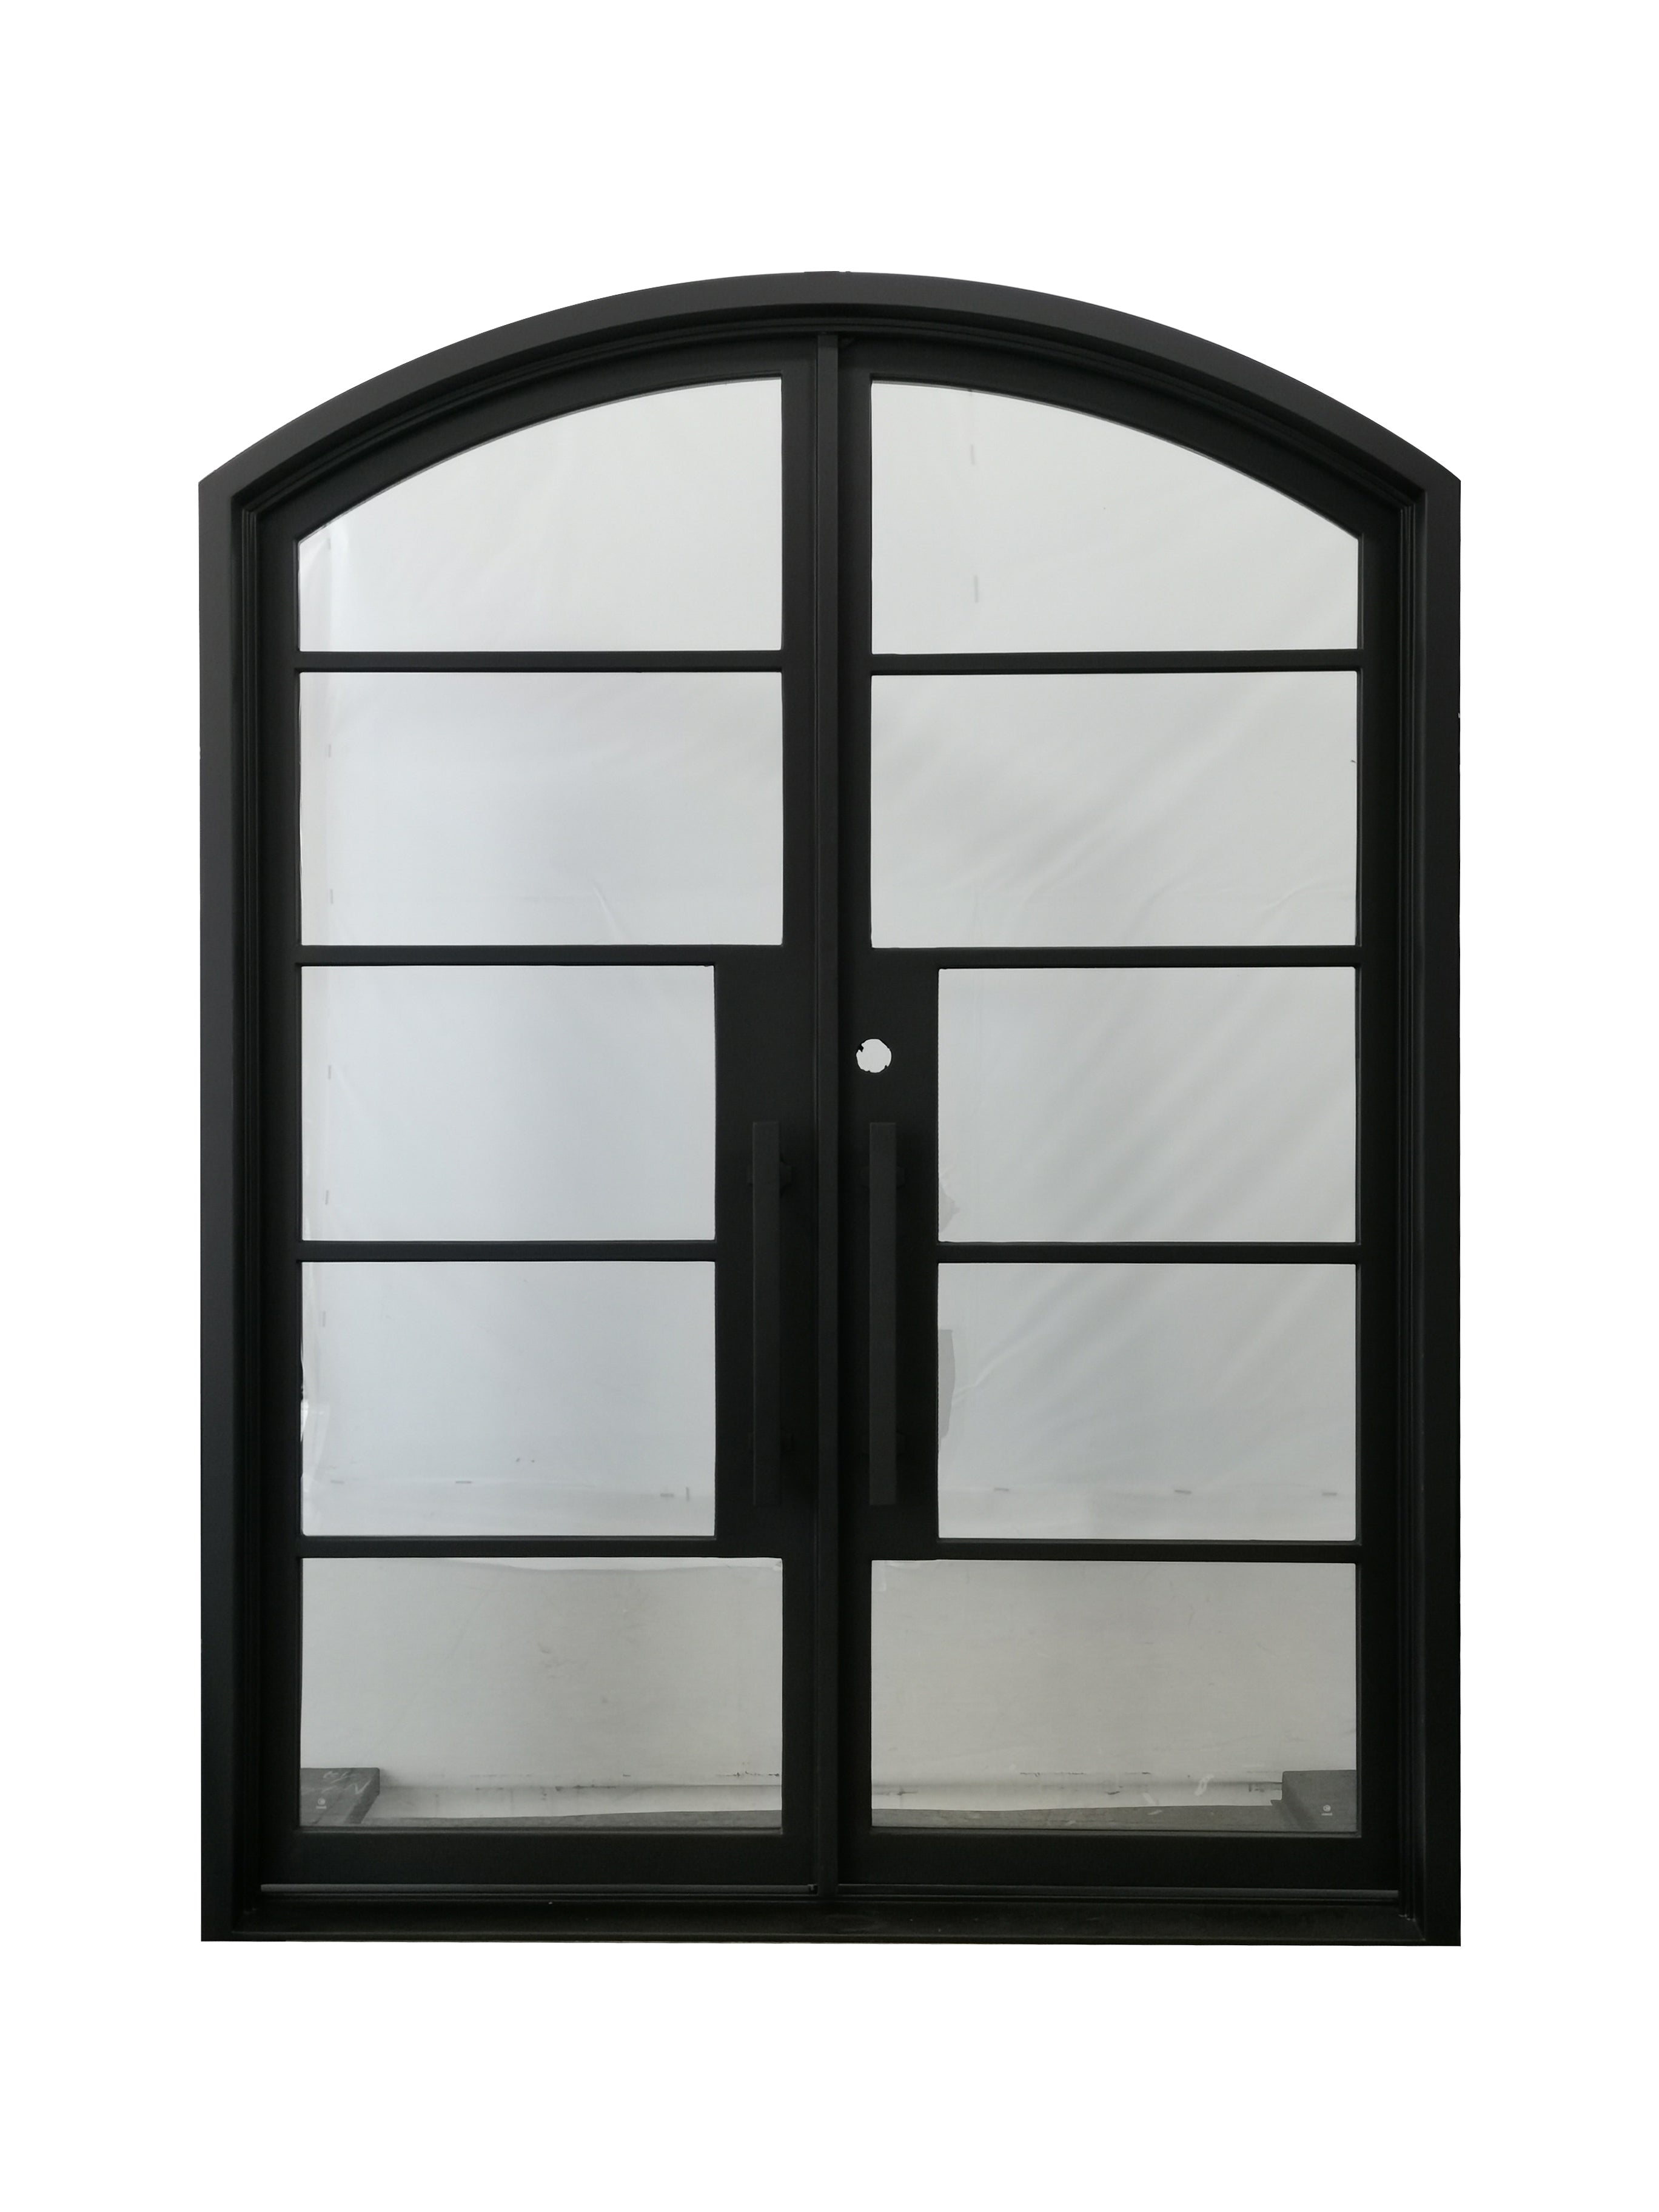 Travis Model Double Front Entry Iron Door With Tempered Low E Clear Glass Matt Black Finish - AAWAIZ IMPORTS